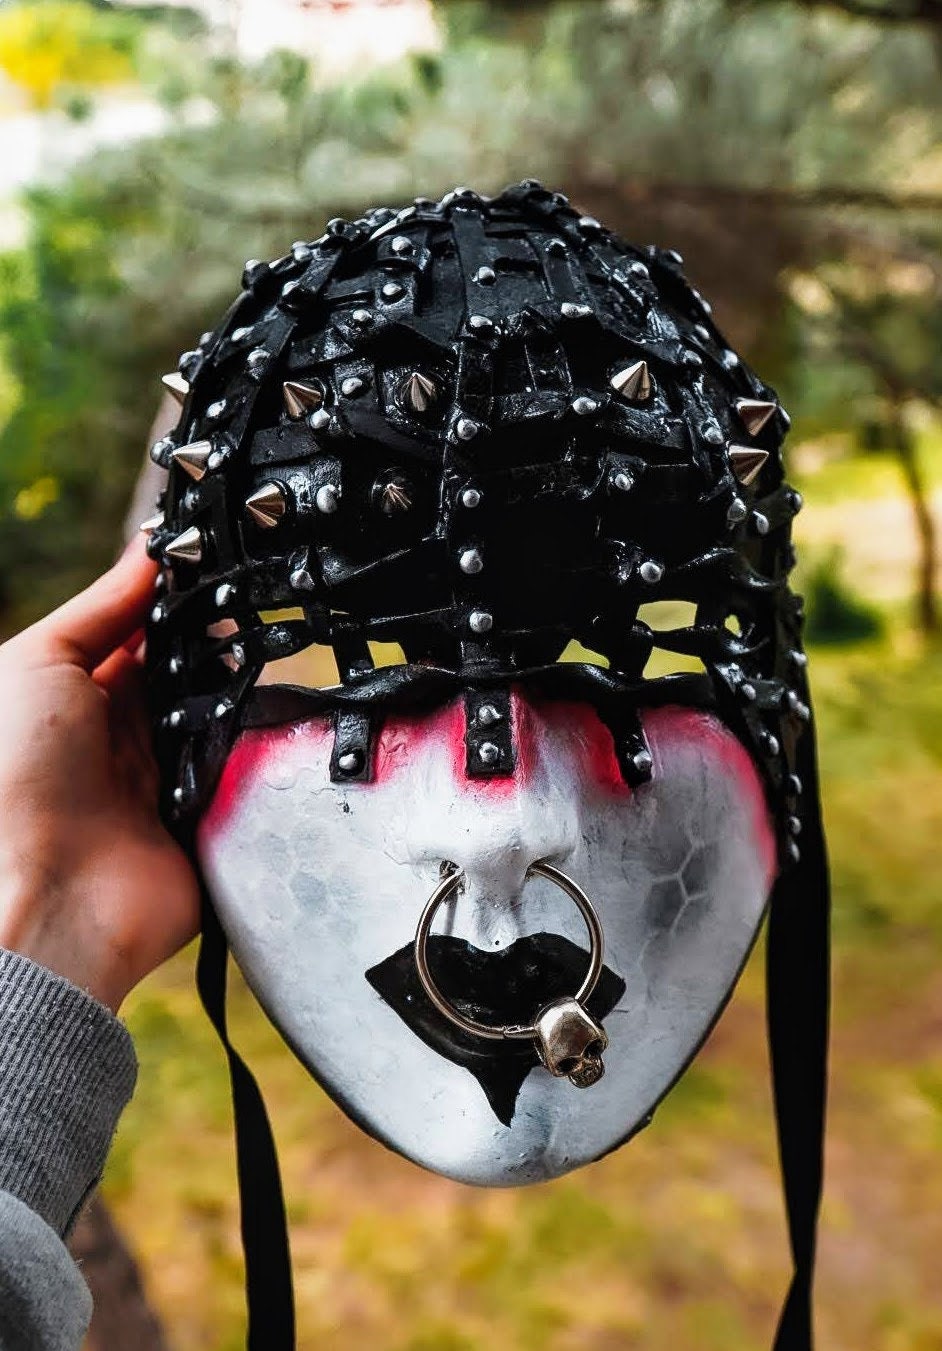 Mask ready - Cernobite full face mask venetian style with studs